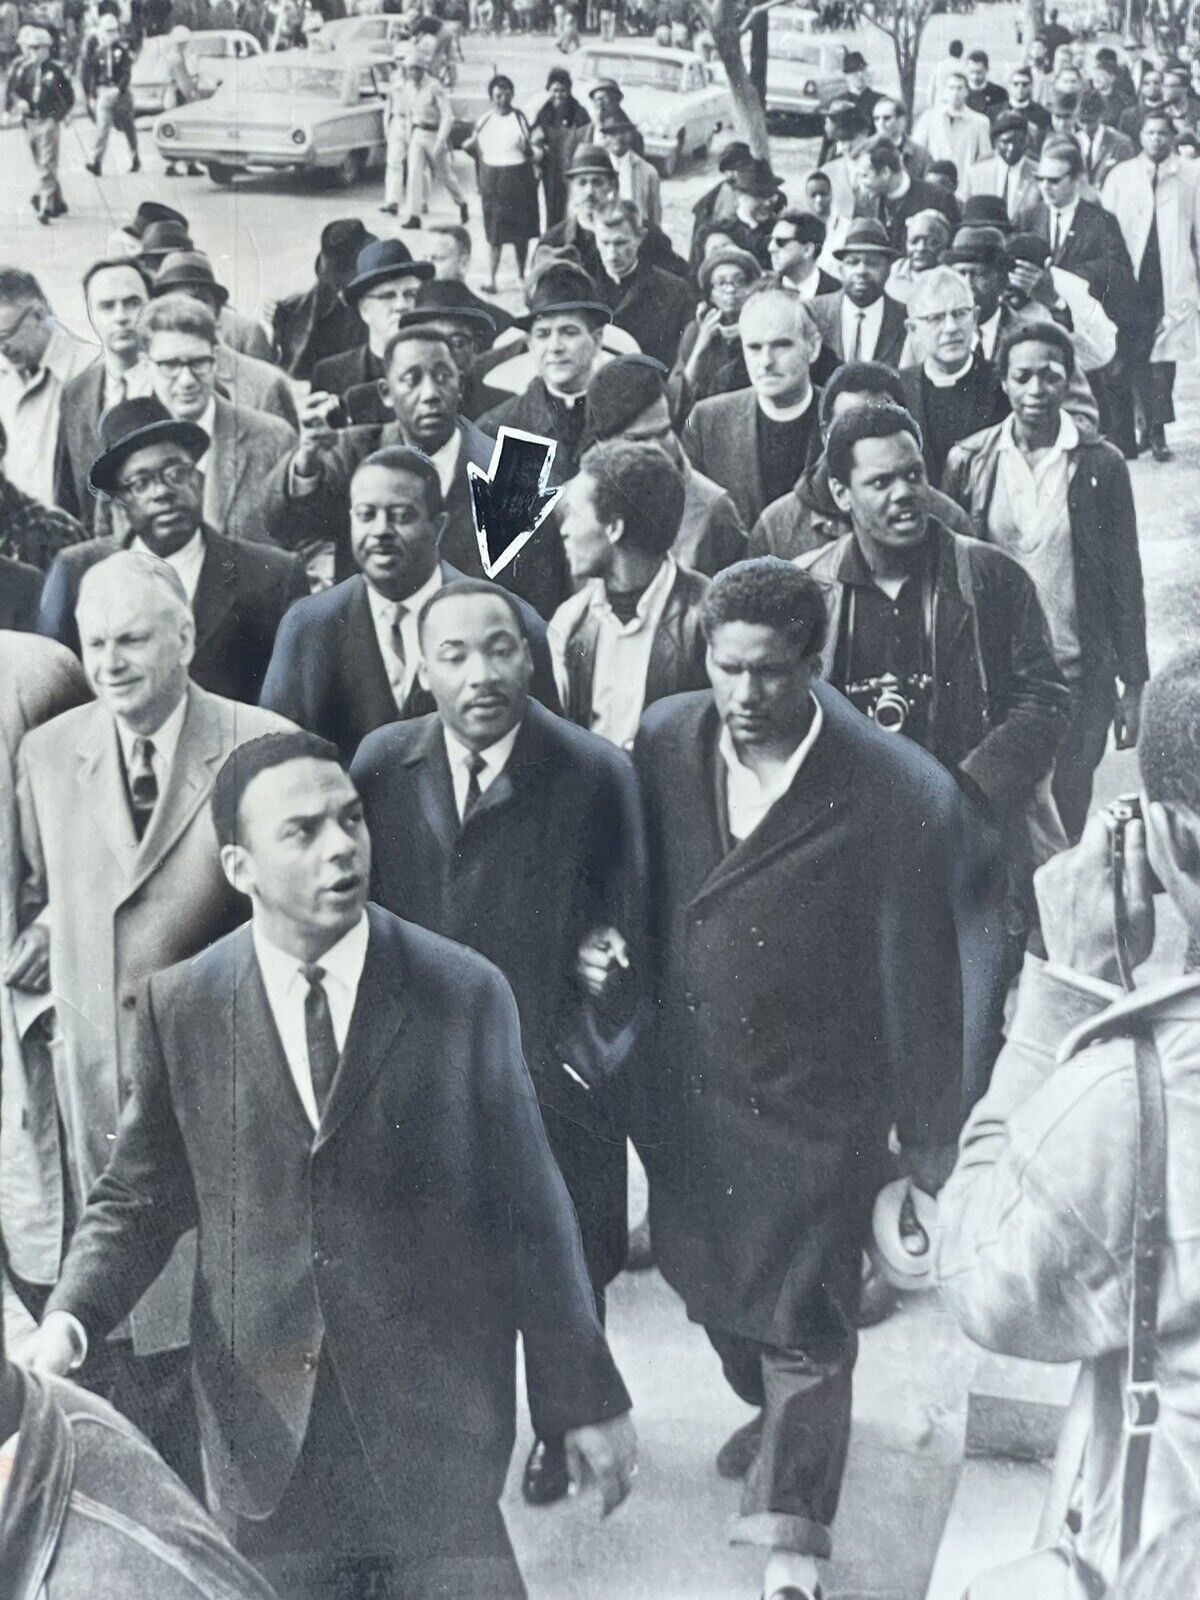 Martin Luther King Civil Rights Press Photograph. #historyinpieces